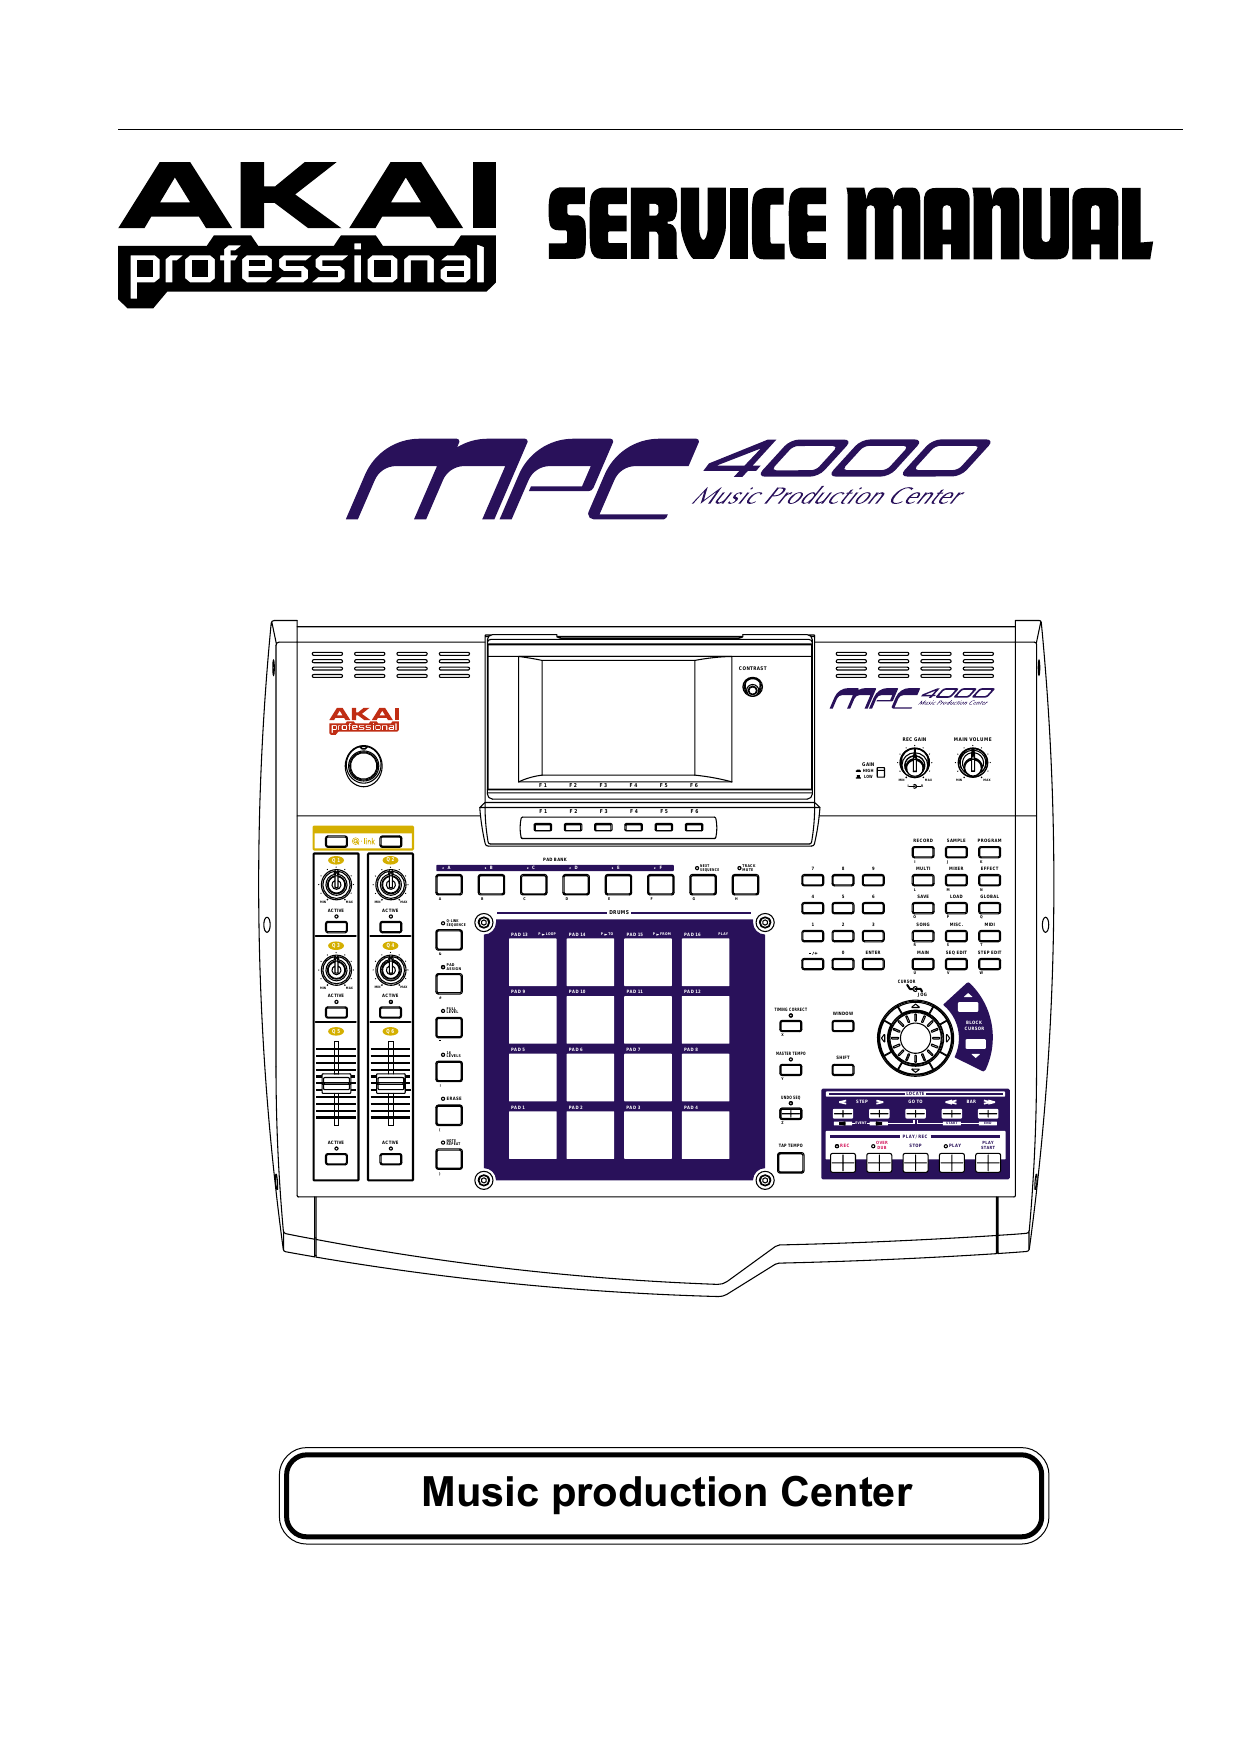 reinstalling mpc 2:0 on new pc